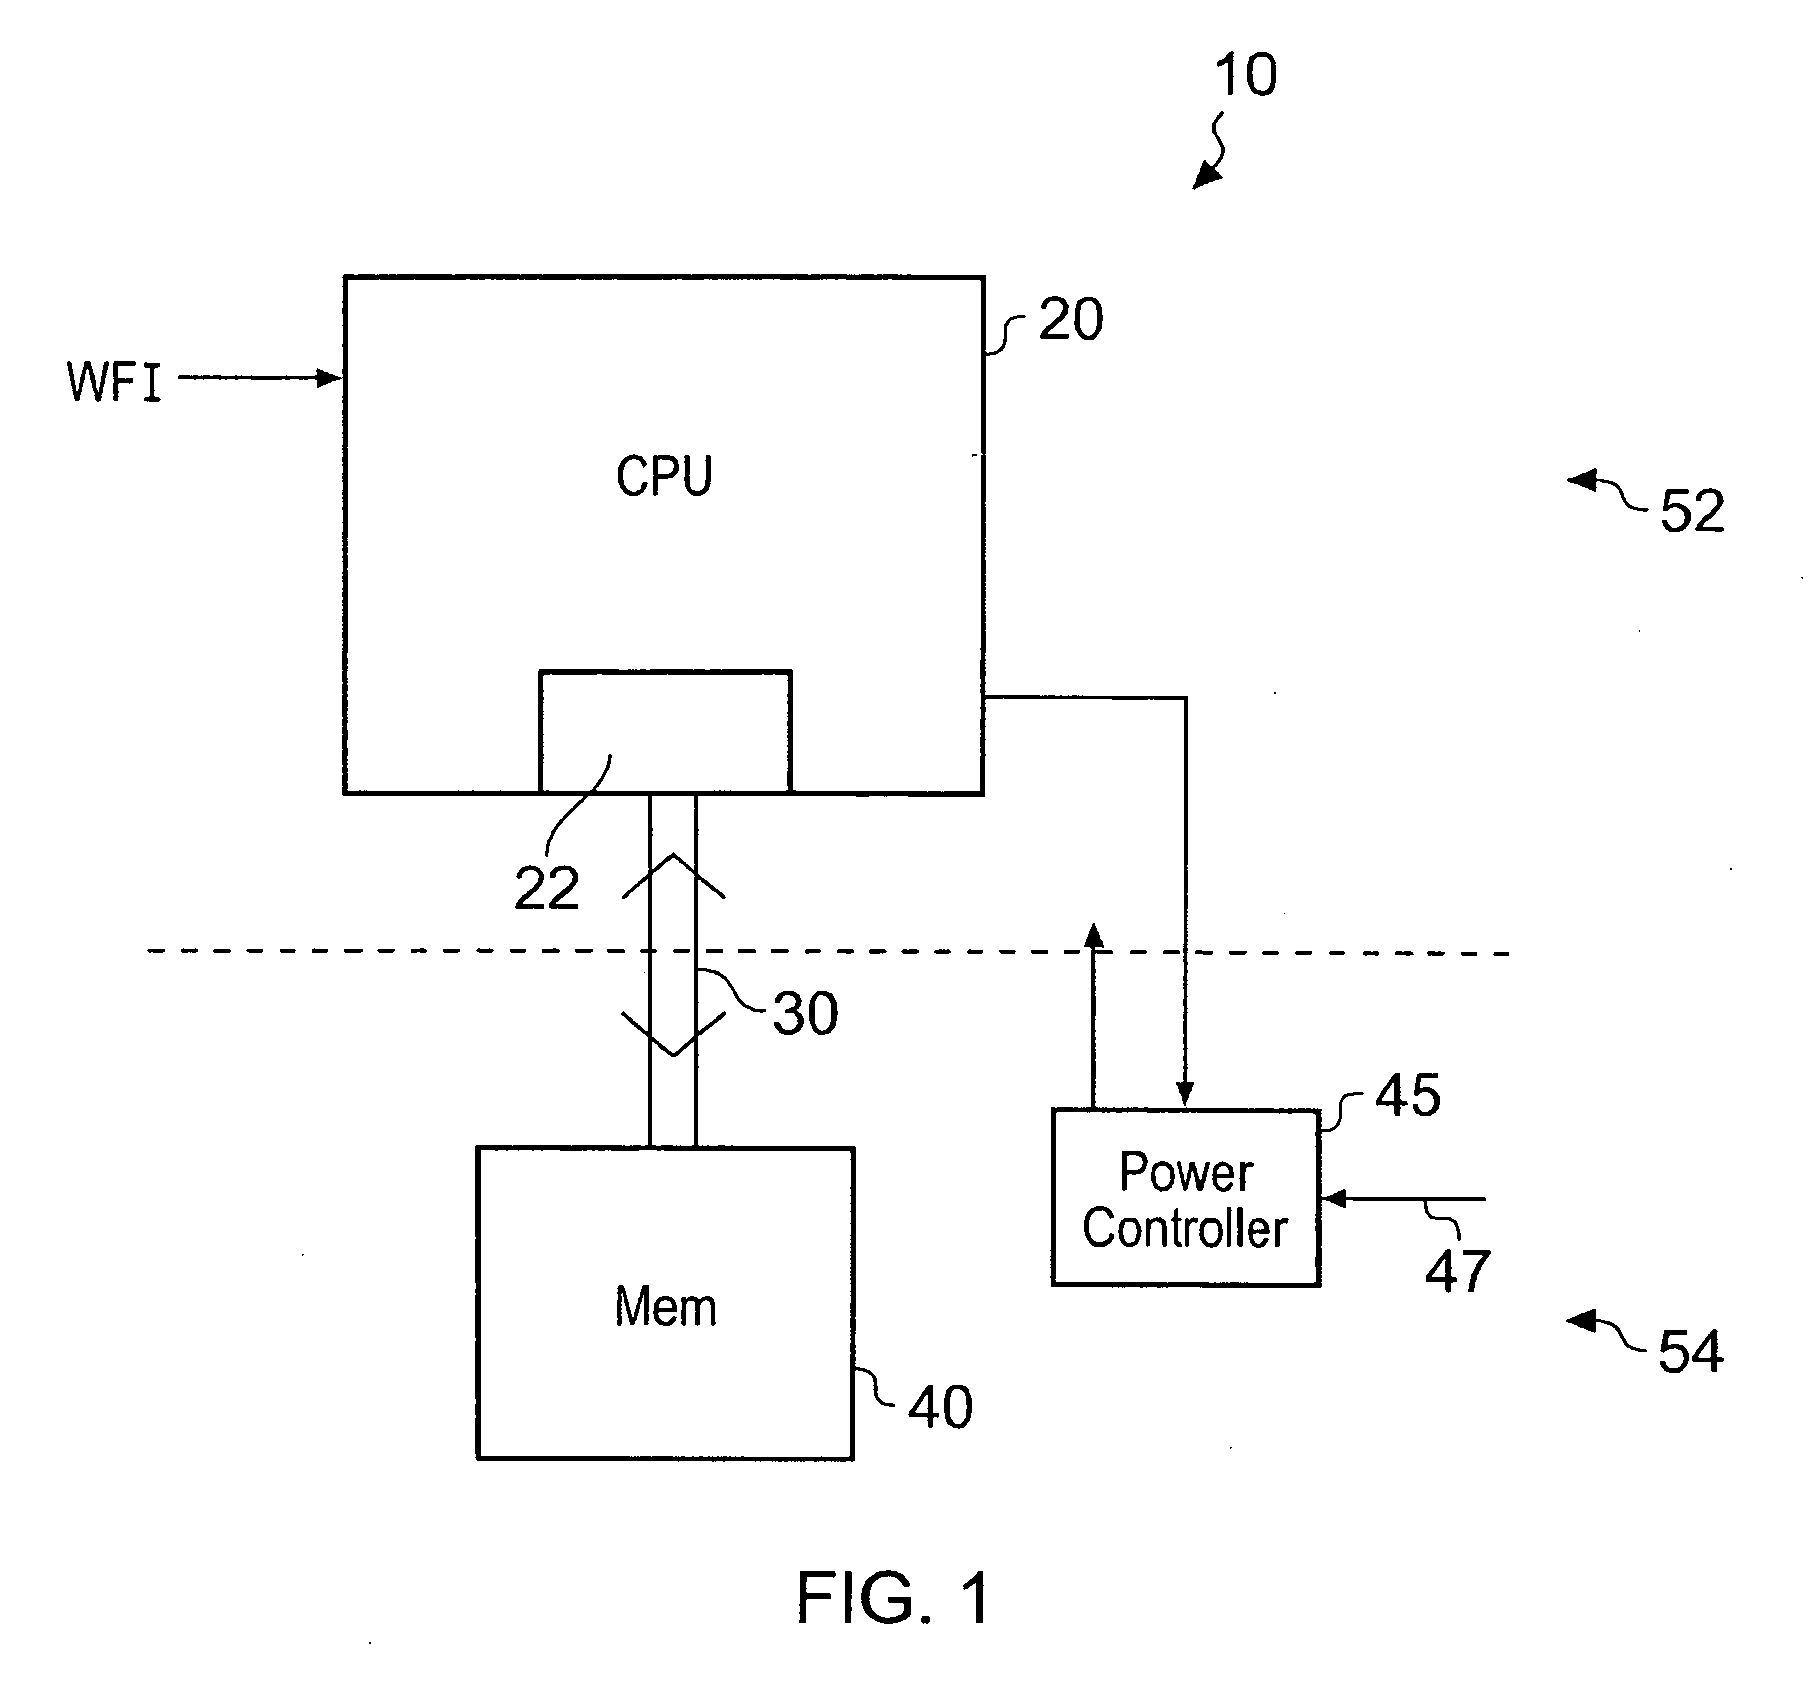 Hardware driven processor state storage prior to entering a low power mode